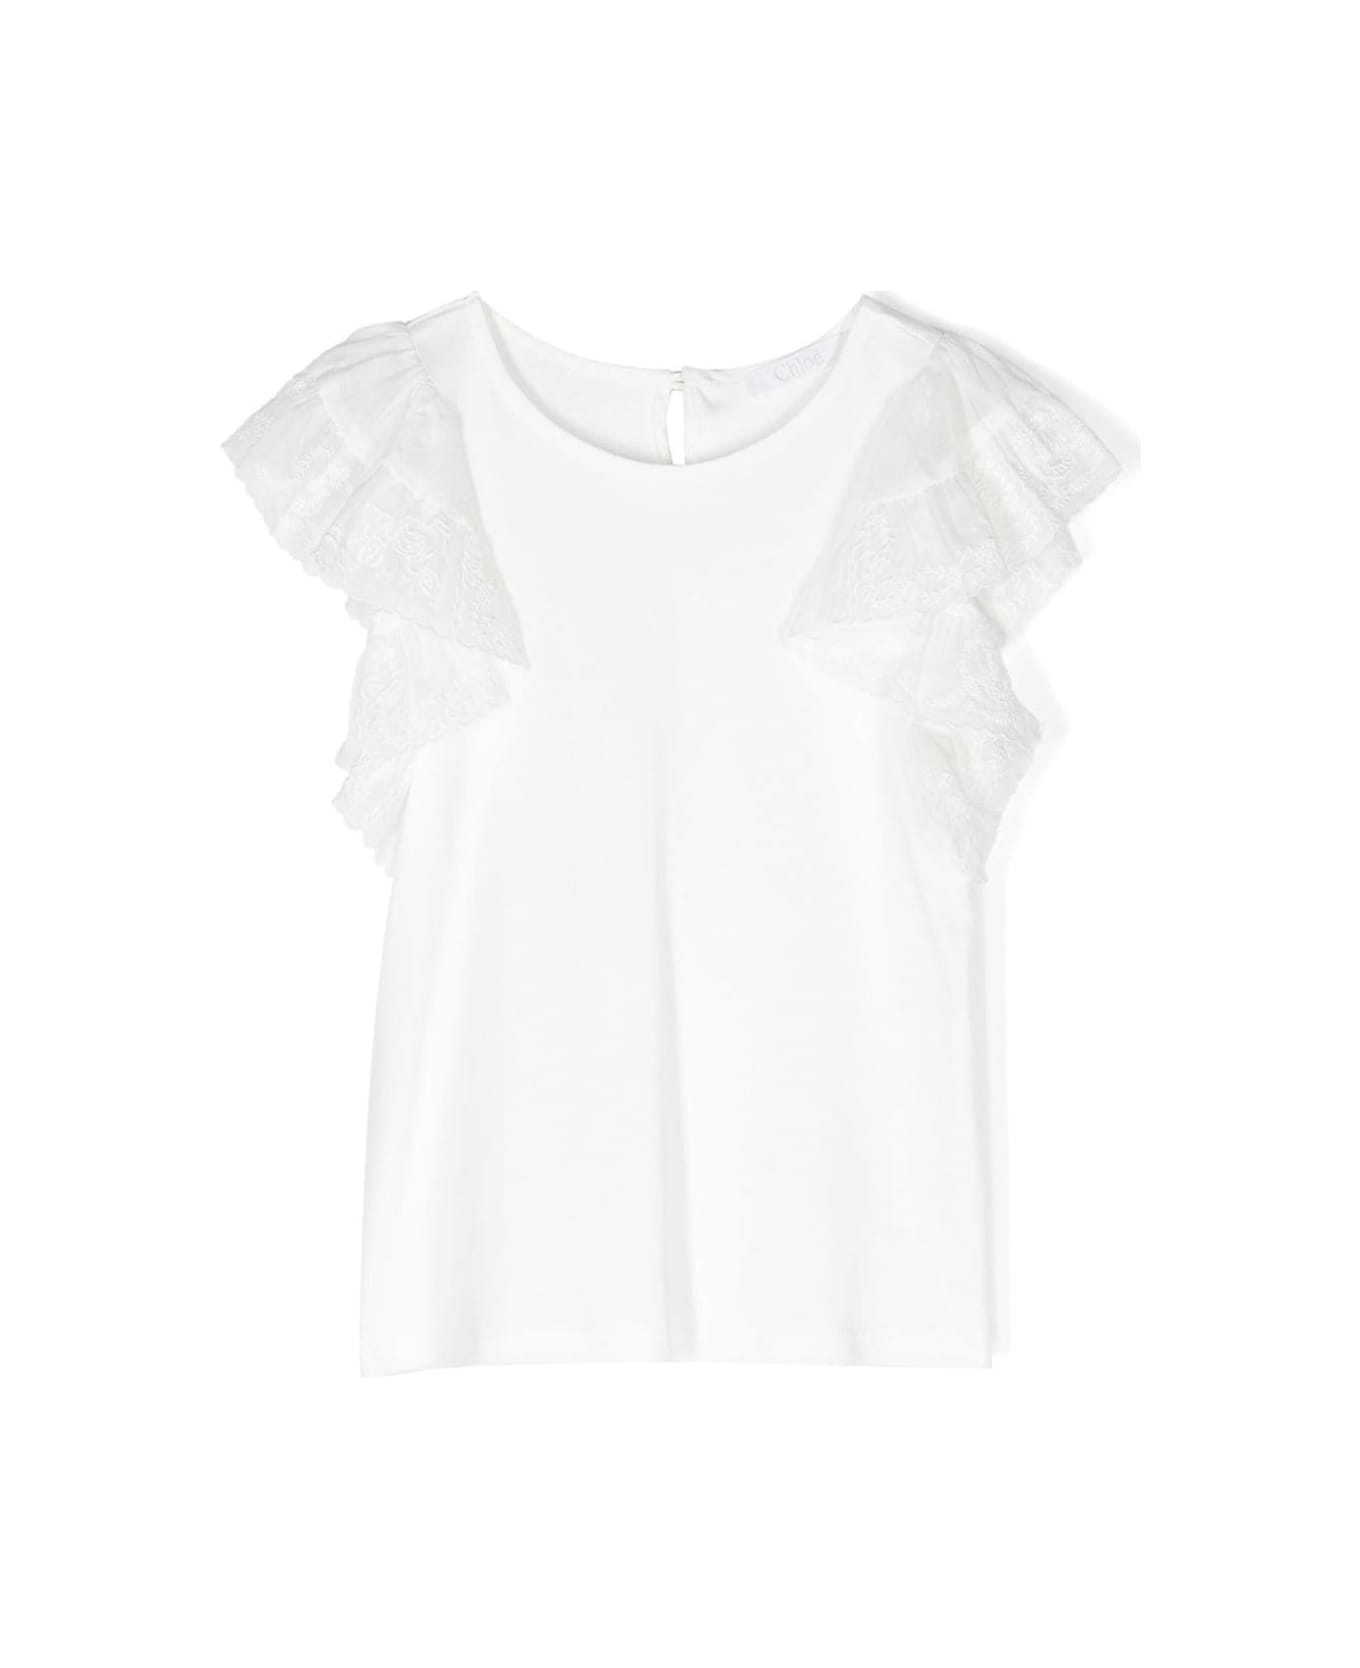 Chloé White Crewneck Top With Lace Ruched Detailing In Cotton Girl - White